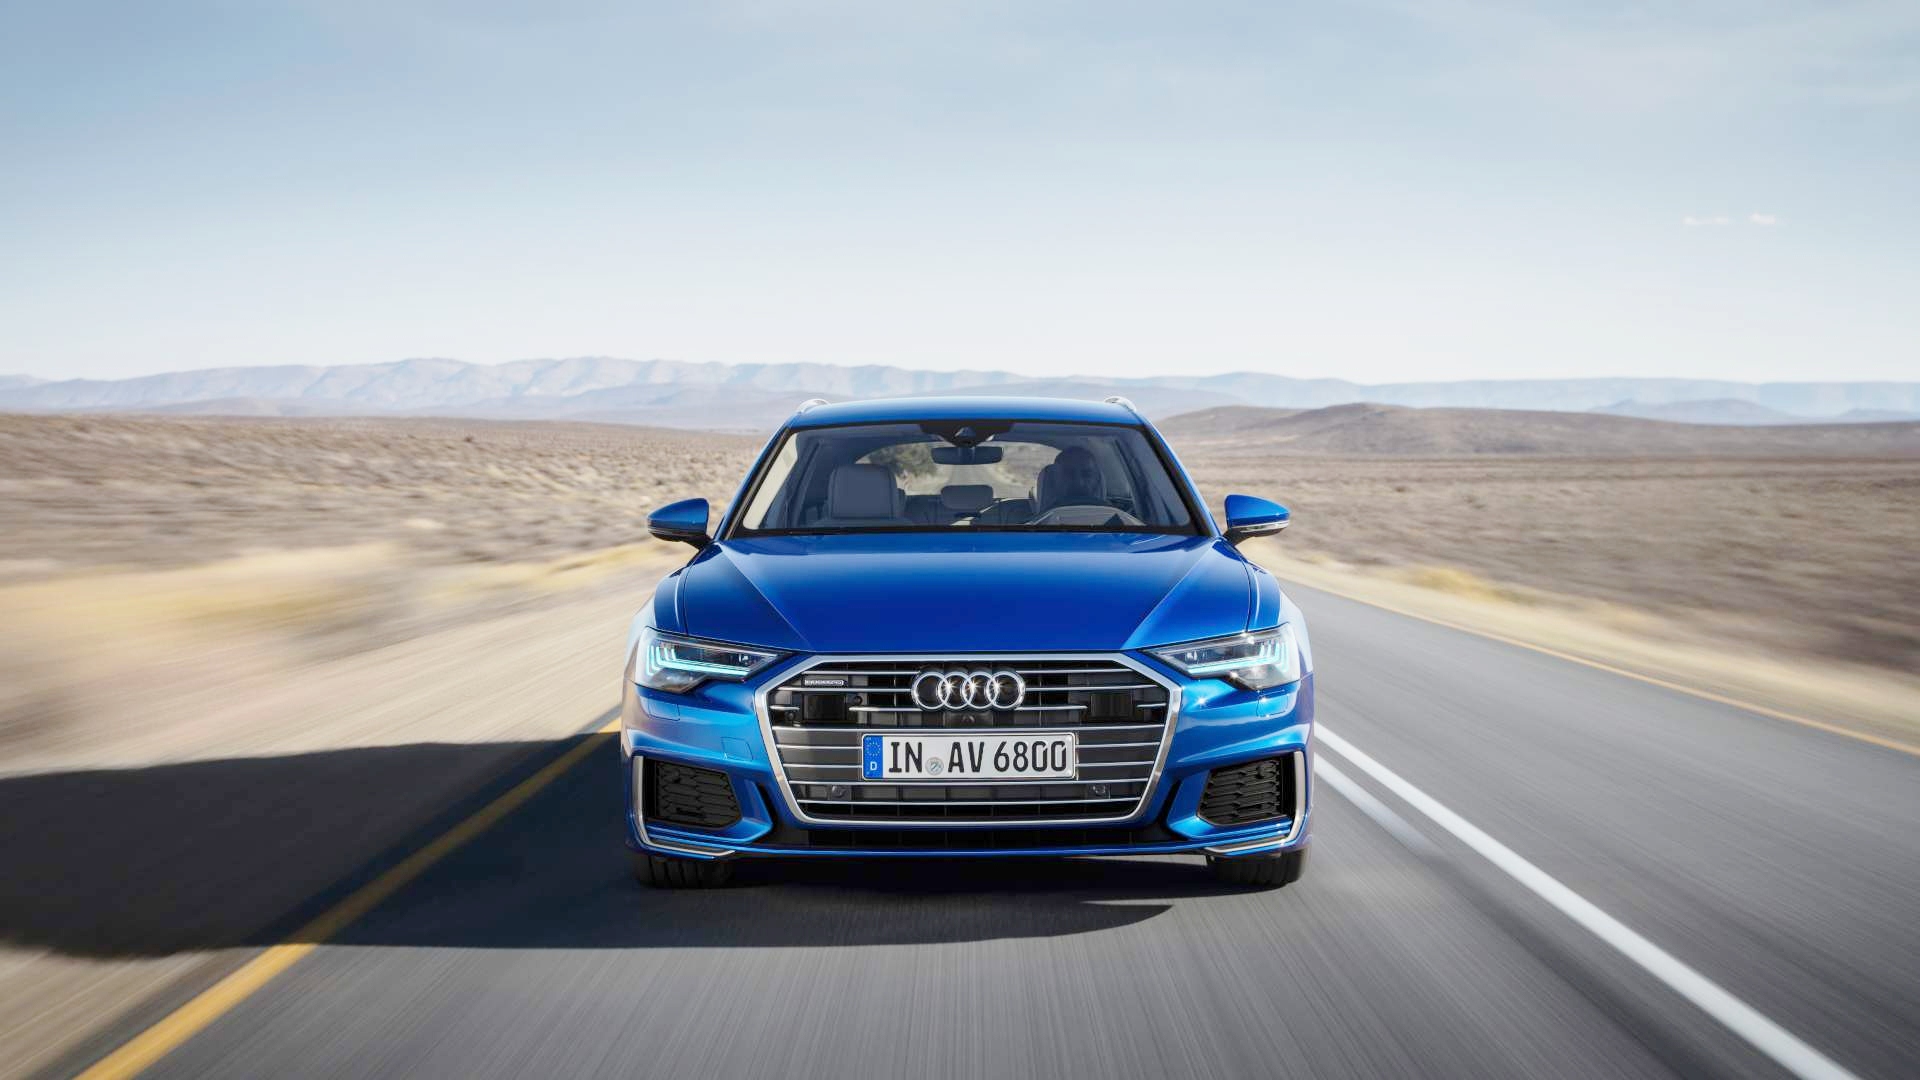 Audi-A6-Avant-2019-dep-hon-voi-gia-1-4-ty-dong-anh-2